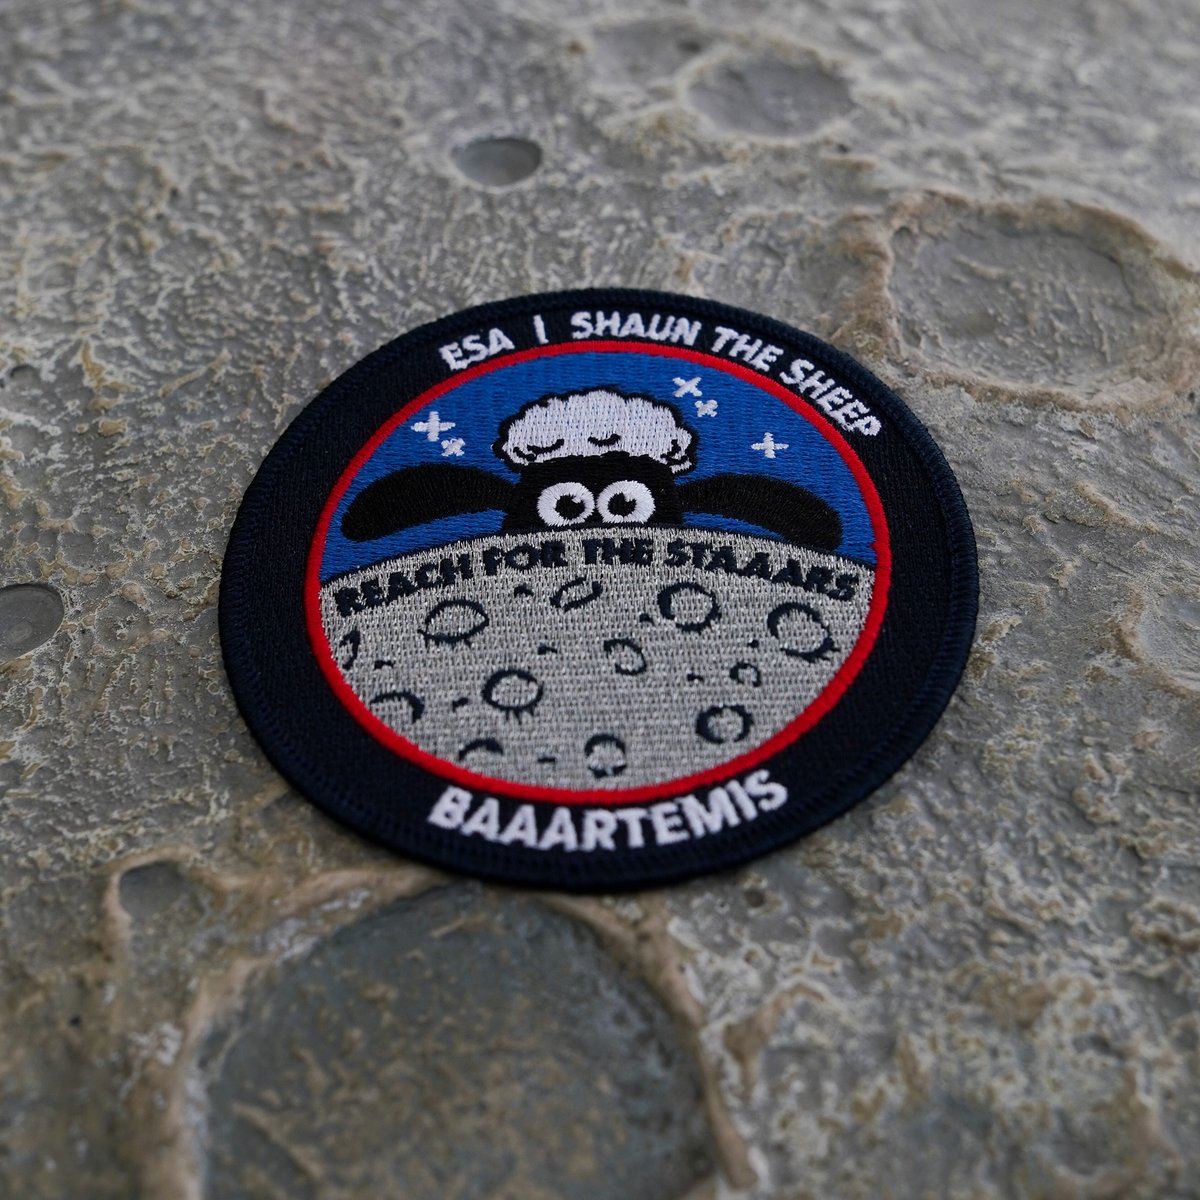 🐏 New Artefact 🐏 This mission patch, now on display in our Space Oddities gallery, was produced to commemorate the historic spaceflight of @shaunthesheep in 2022 aboard @NASAArtemis 1's mission to the Moon in partnership with @esa. #Baaartemis collections.spacecentre.co.uk/object-2023-7